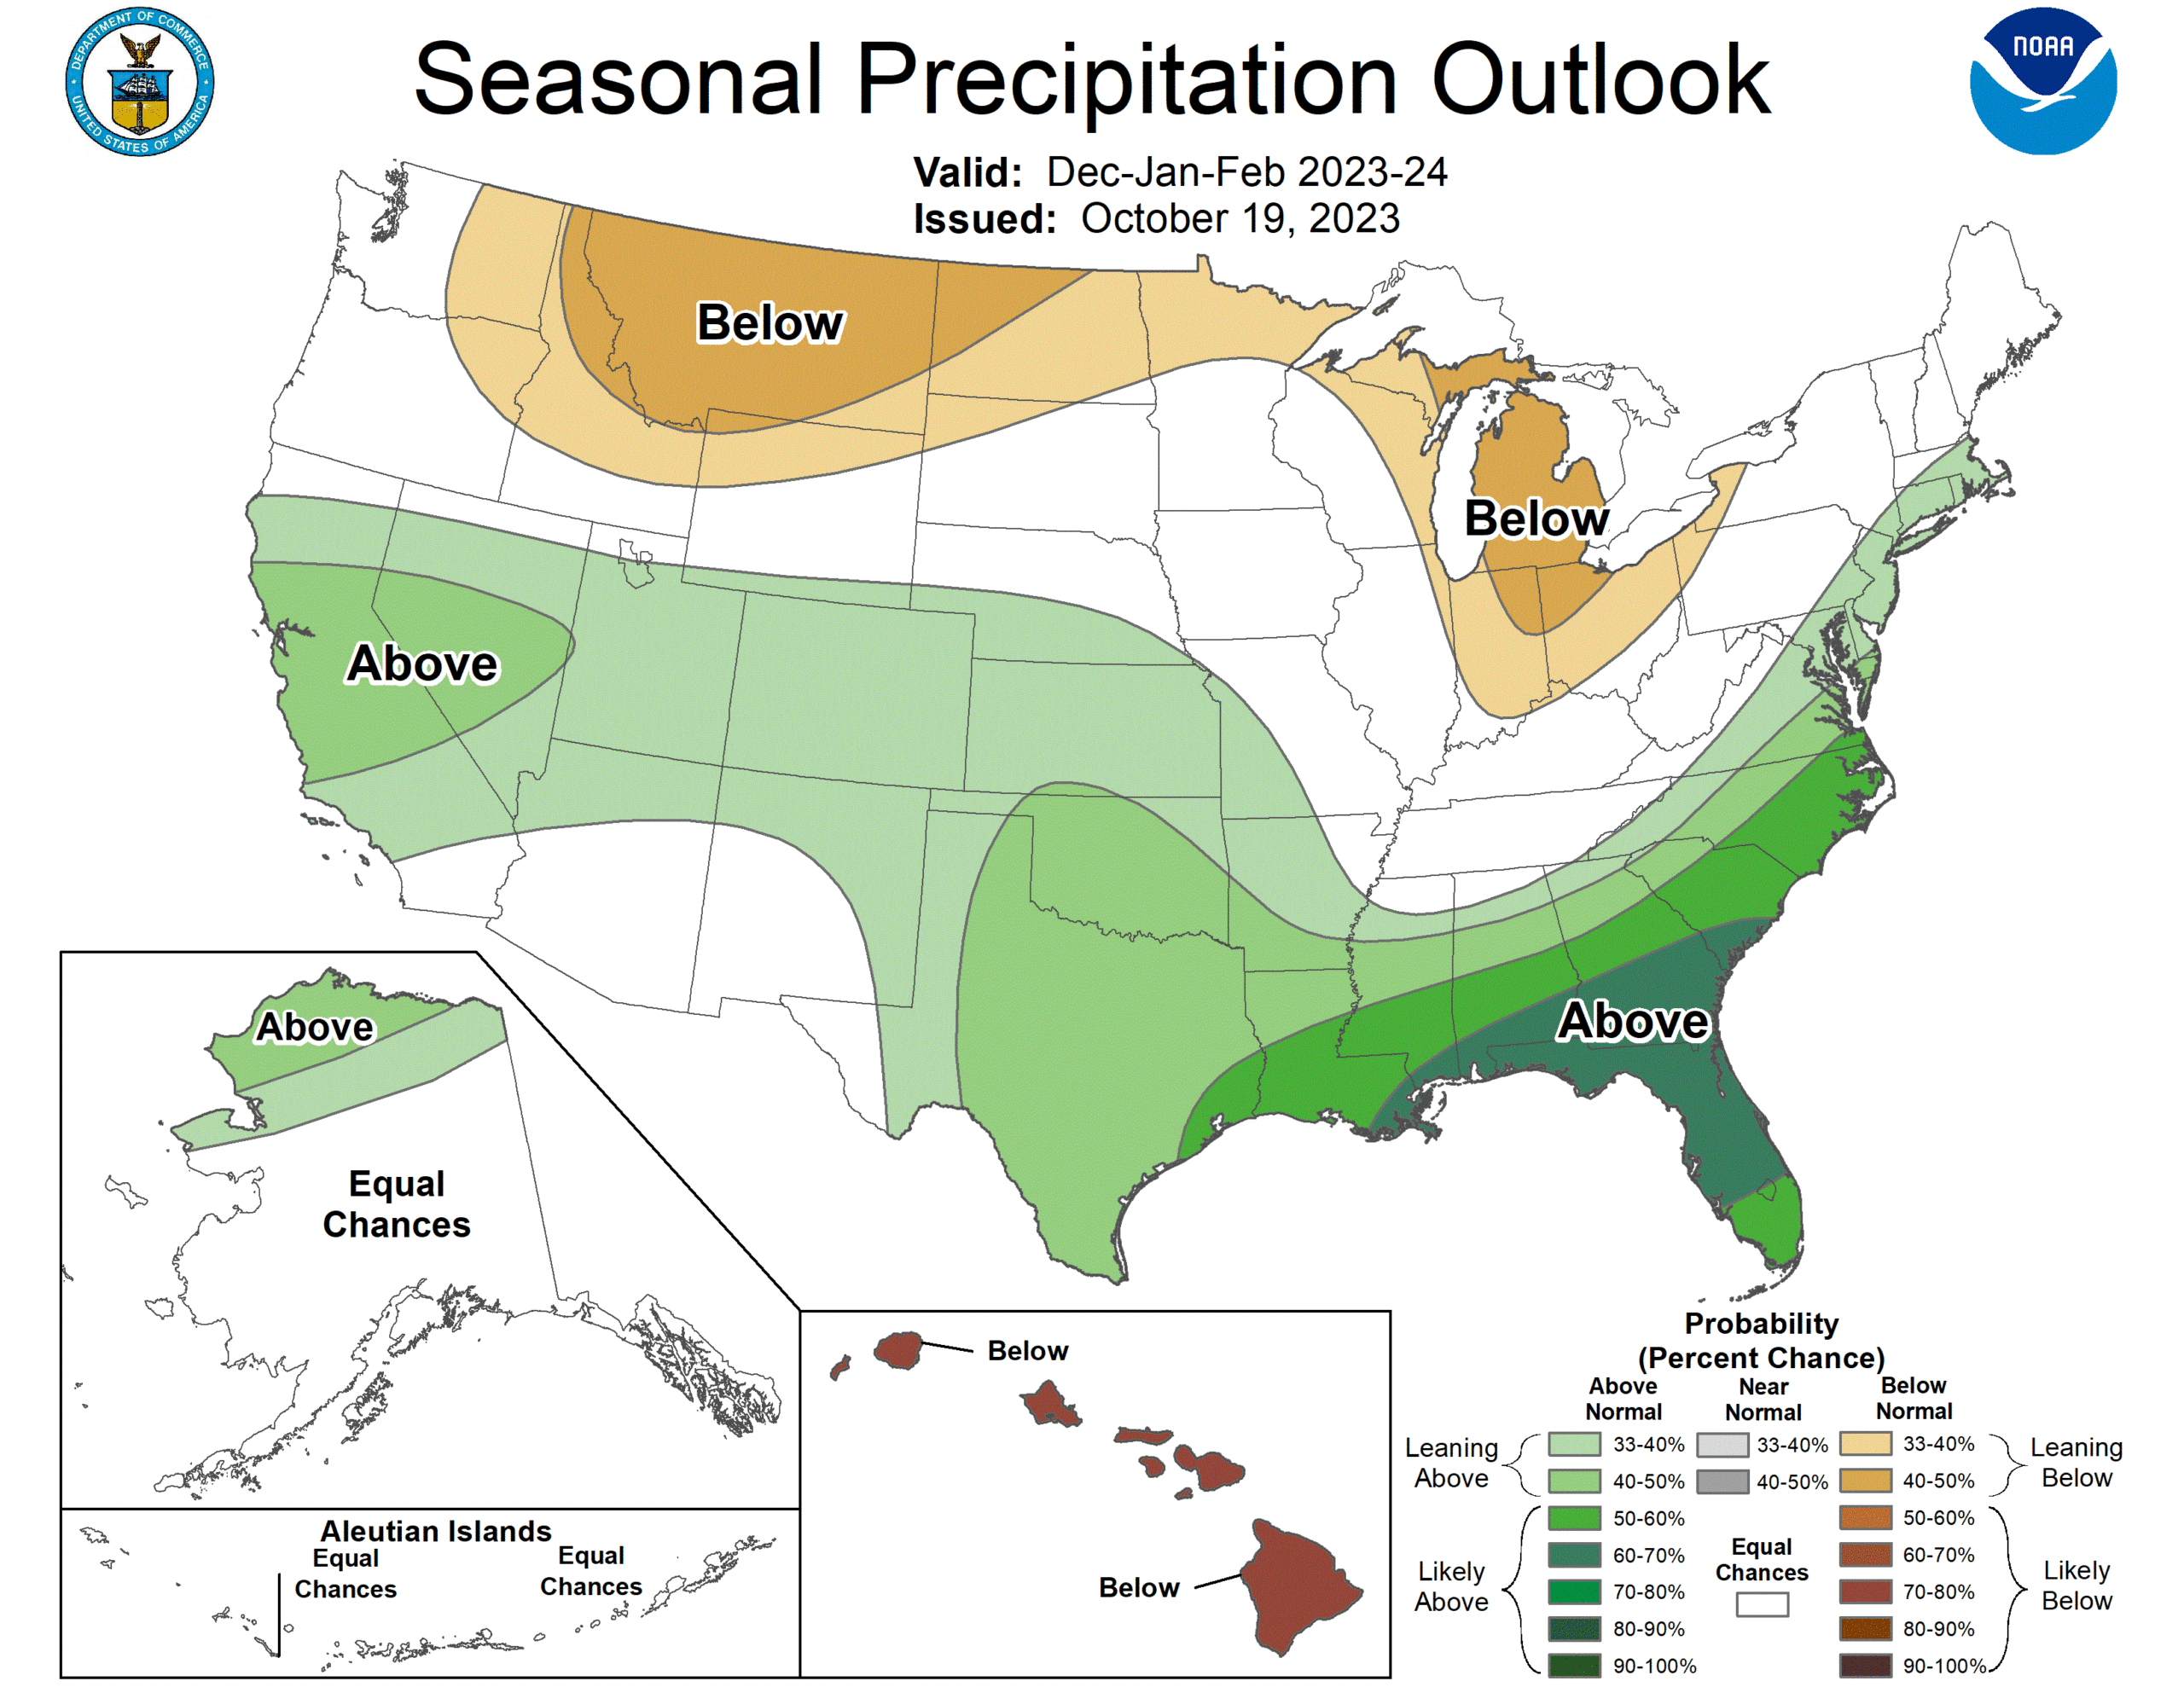 A map showing NOAA's seasonal precipitation outlook for December, January, and February